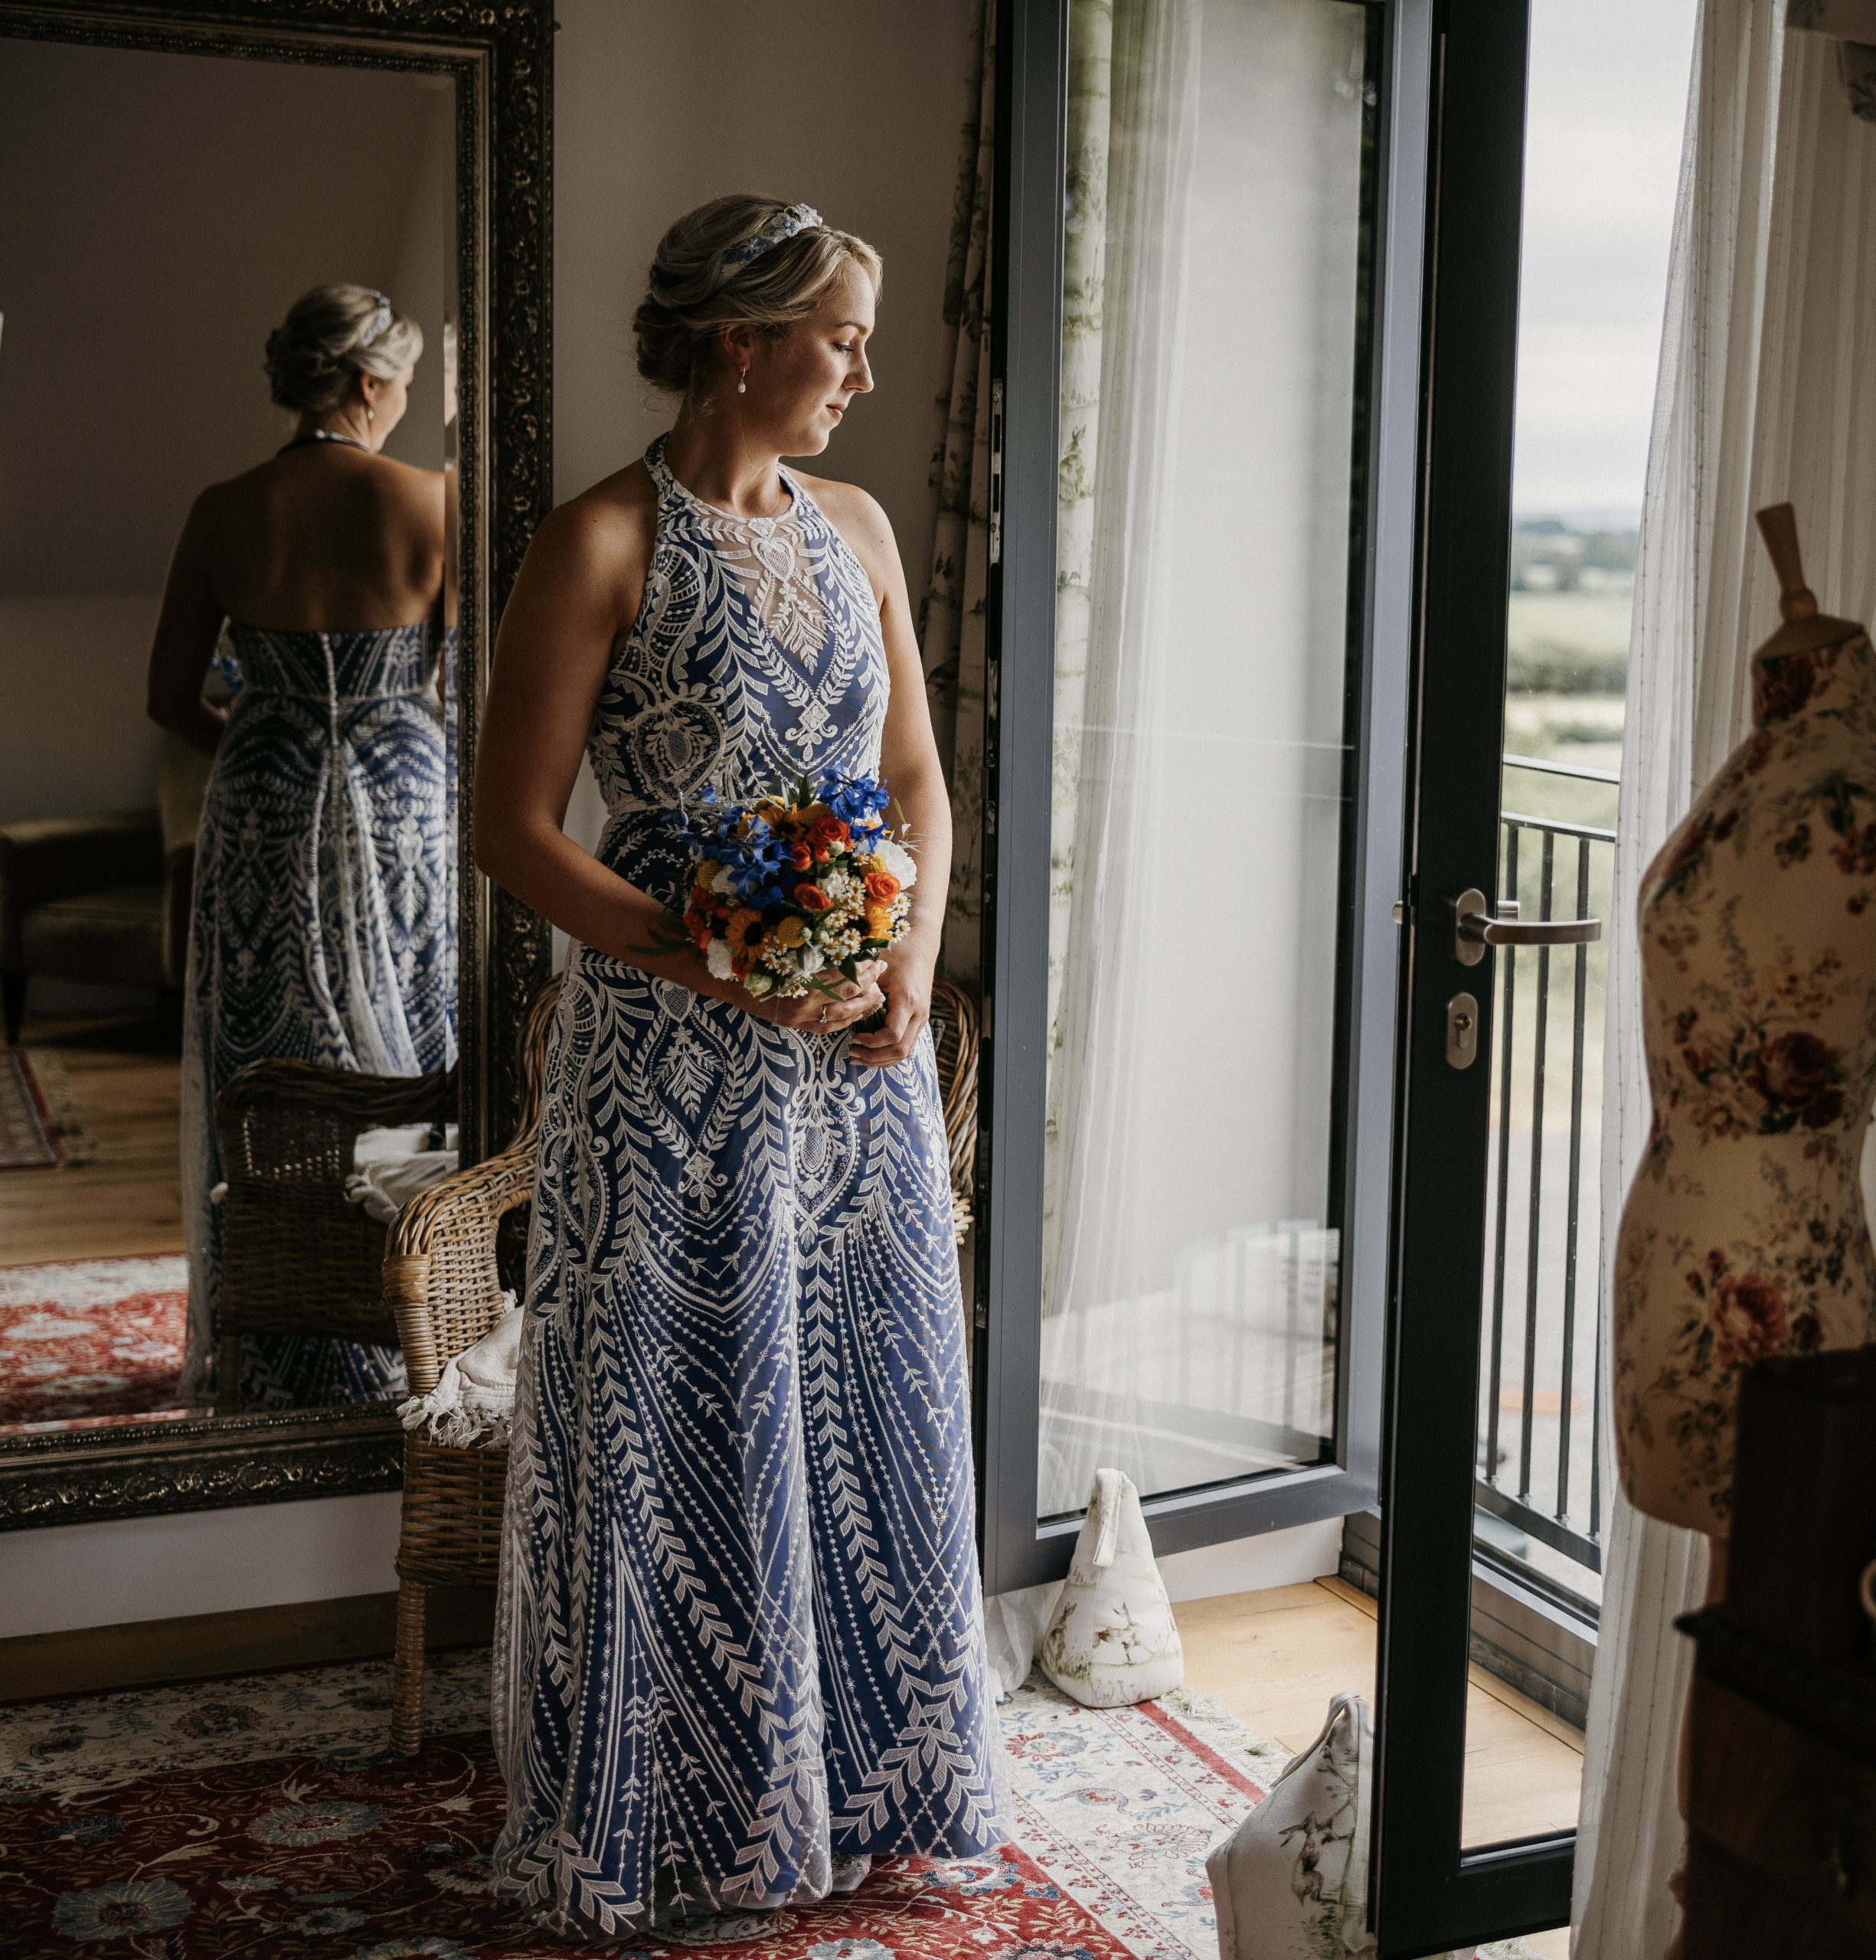 Bridal portrait of a bride in a beautiful bespoke lace dress with royal blue silk underlay.